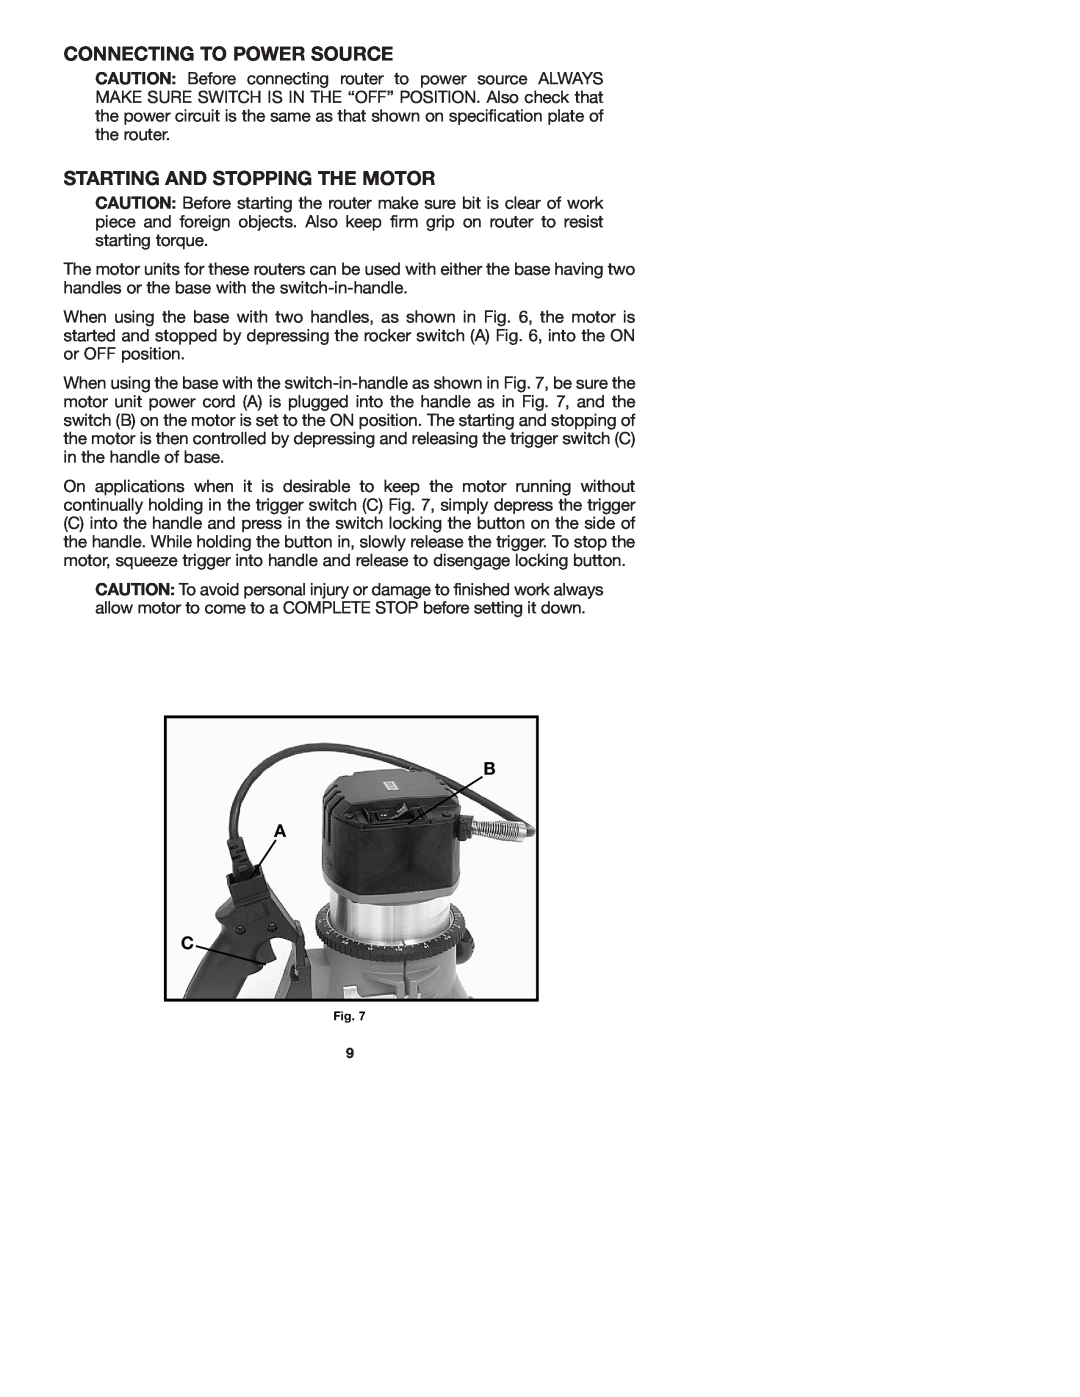 Porter-Cable 7536 instruction manual Connecting To Power Source, Starting And Stopping The Motor, B A C 